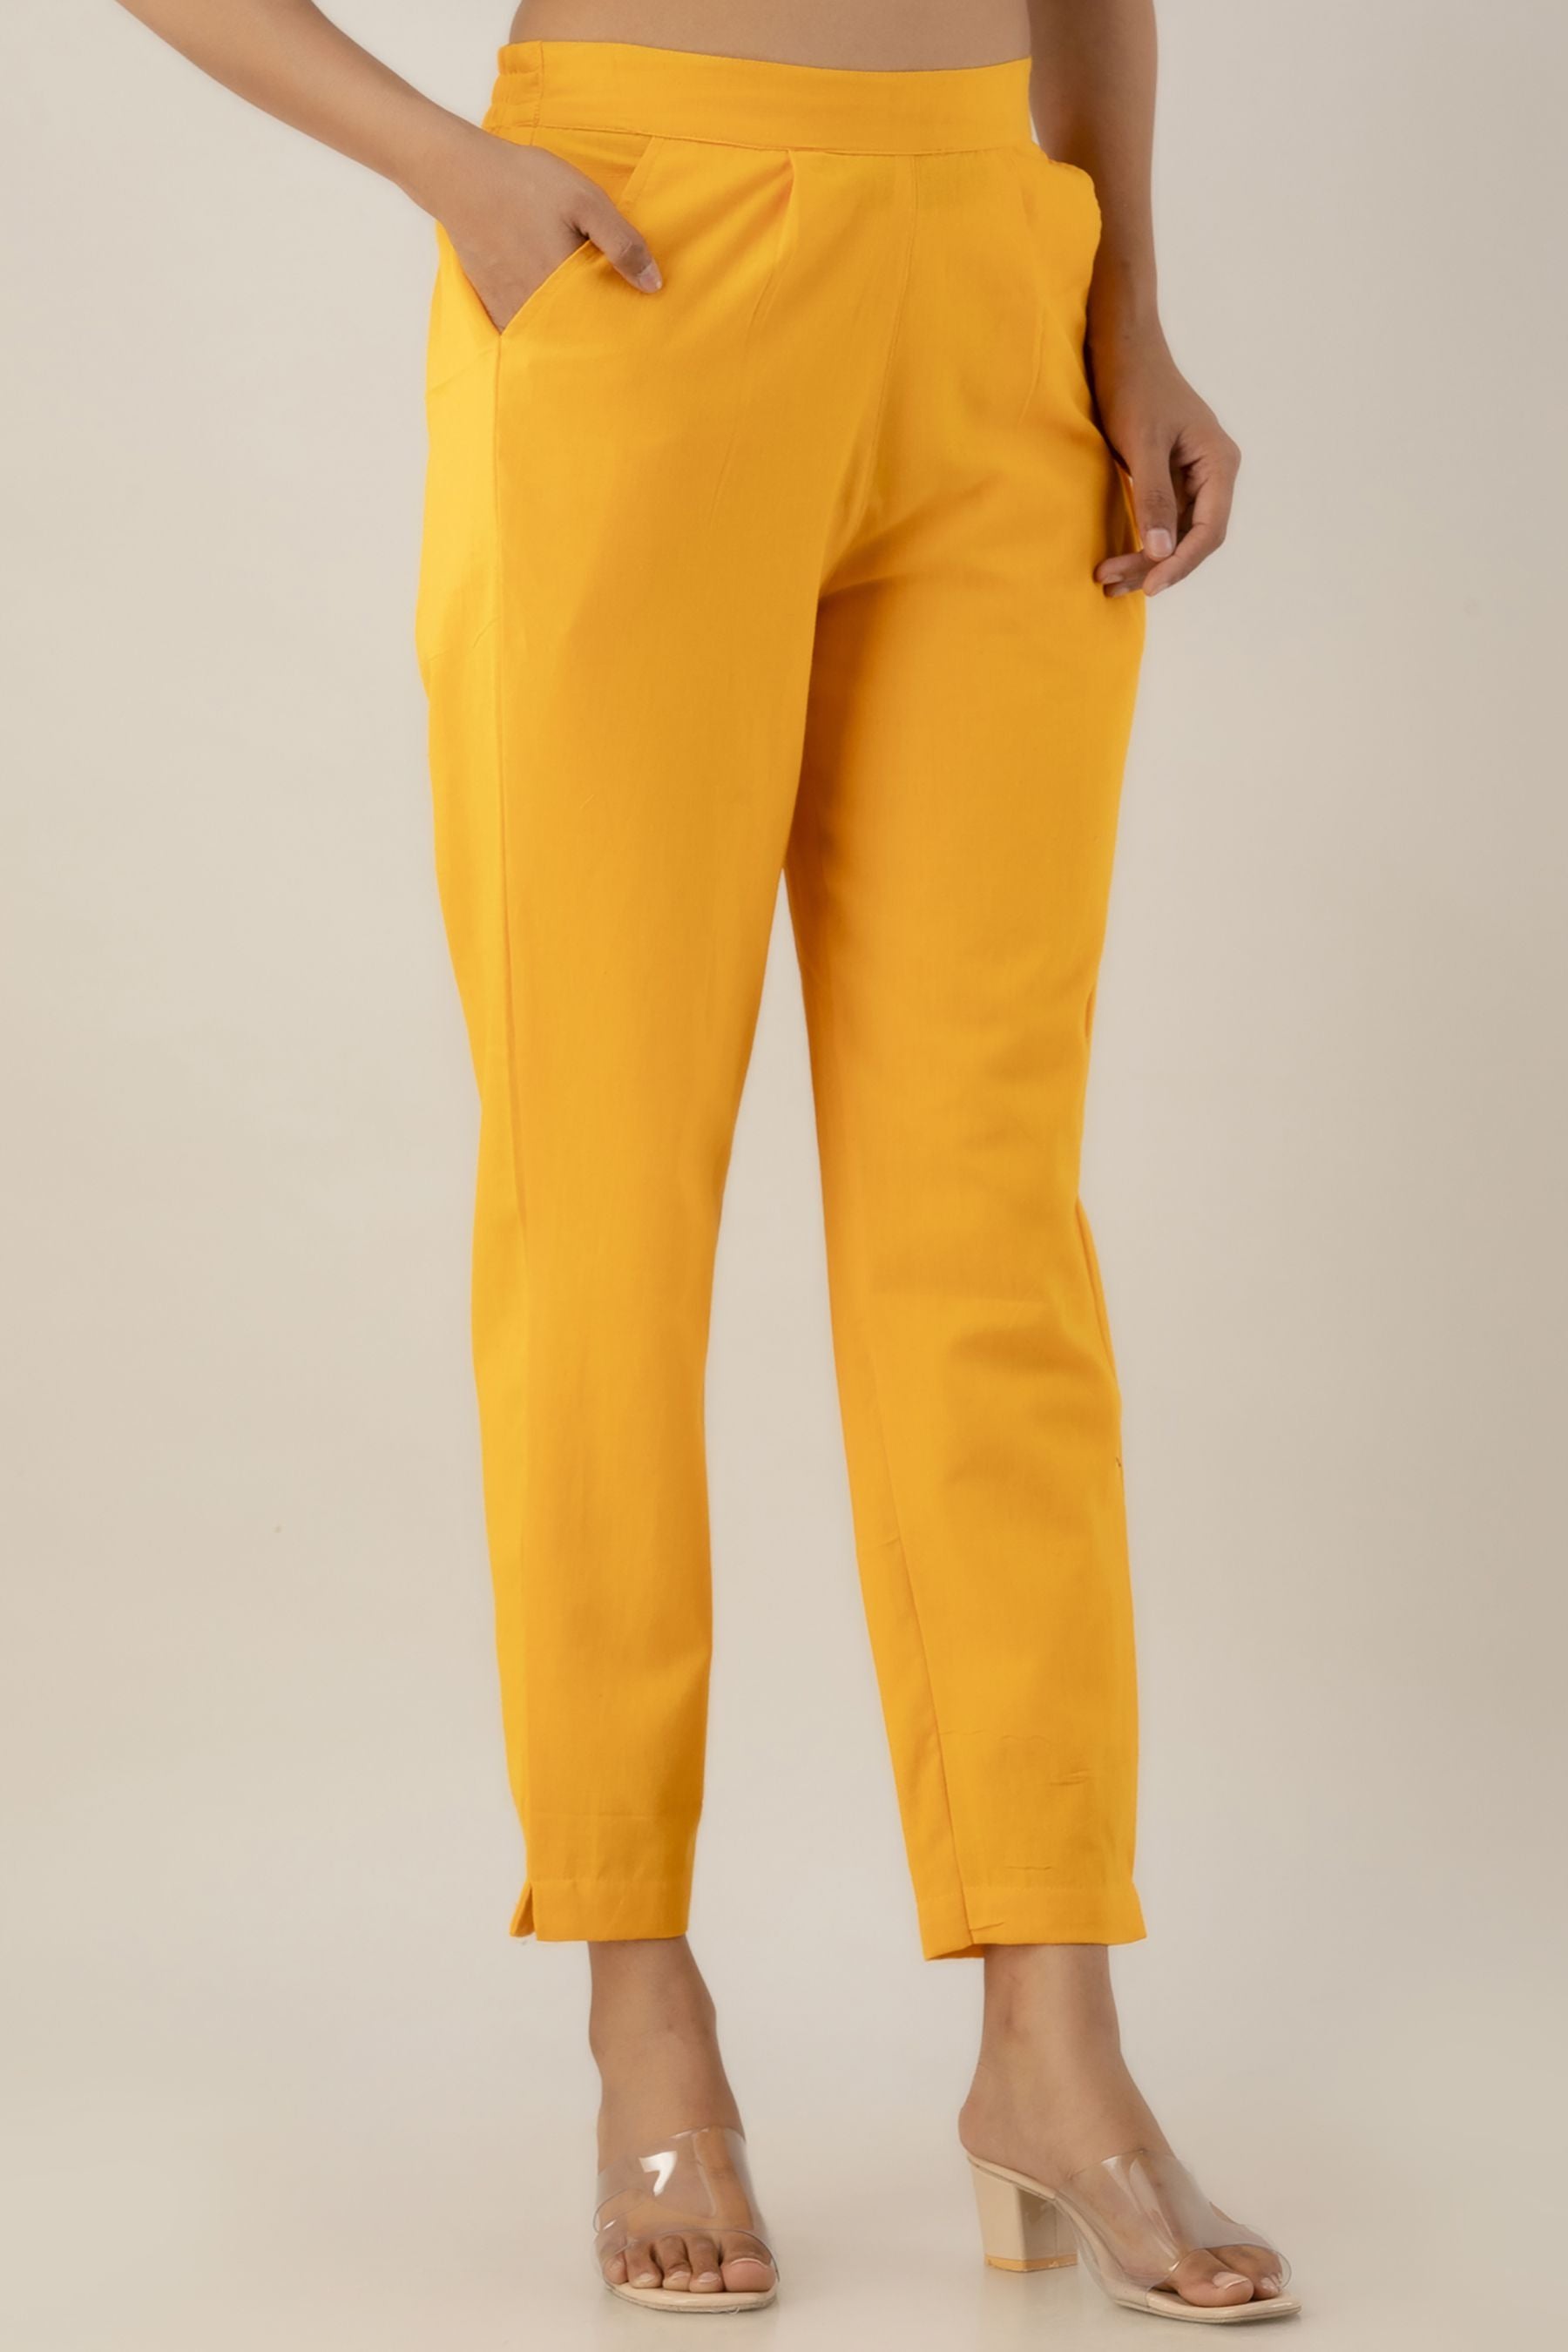 Jacquemus - Sauge High-rise Canvas Trousers - Womens - Light Yellow - 34 FR